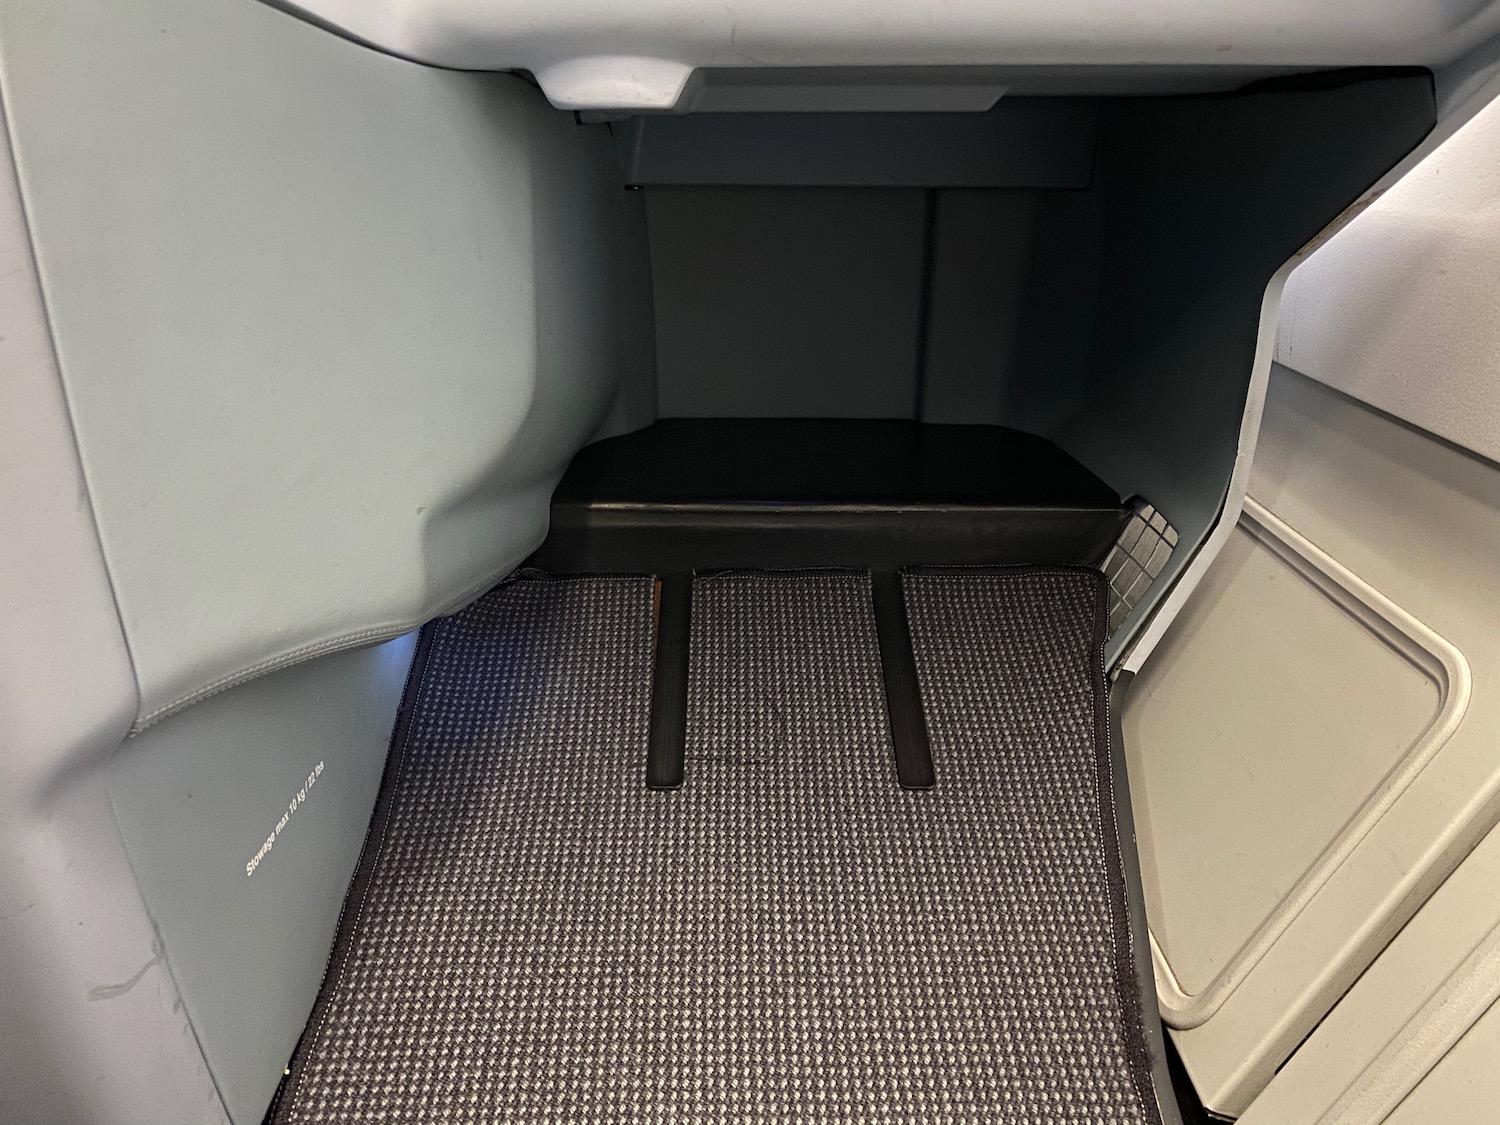 a carpeted floor in an airplane